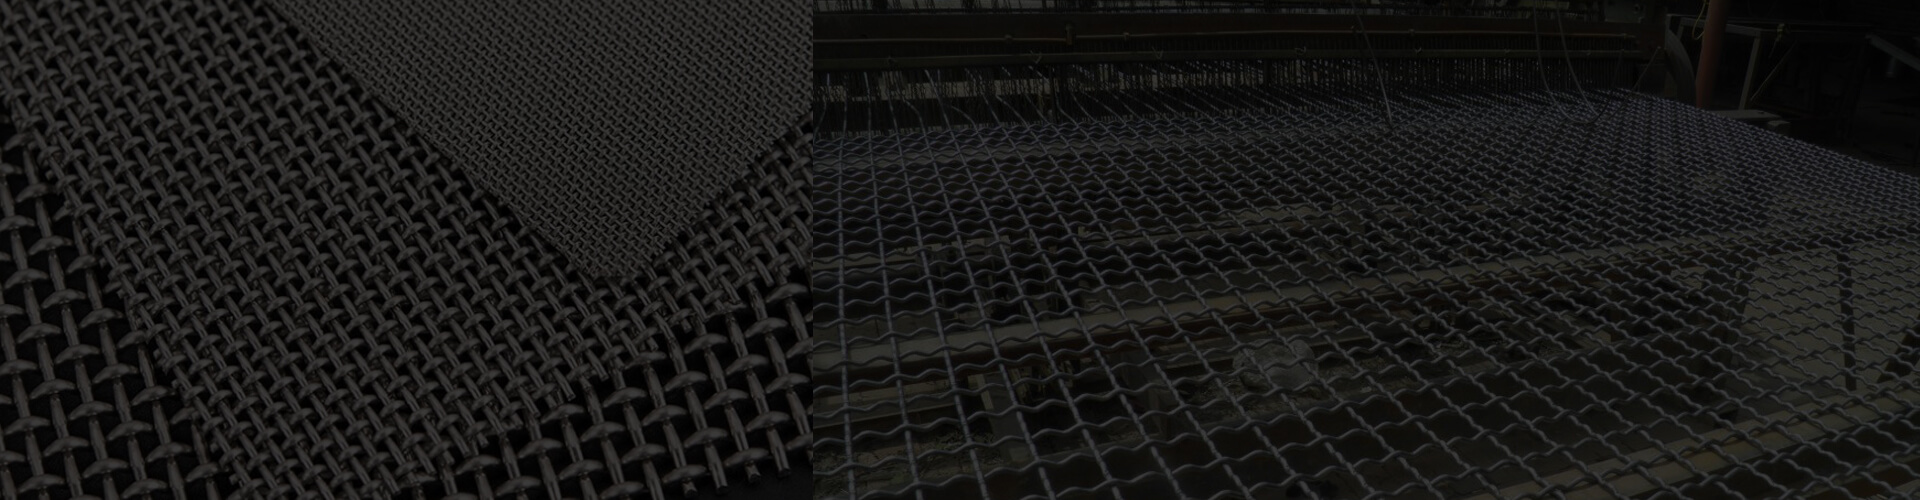 Woven Mesh for sale banner image